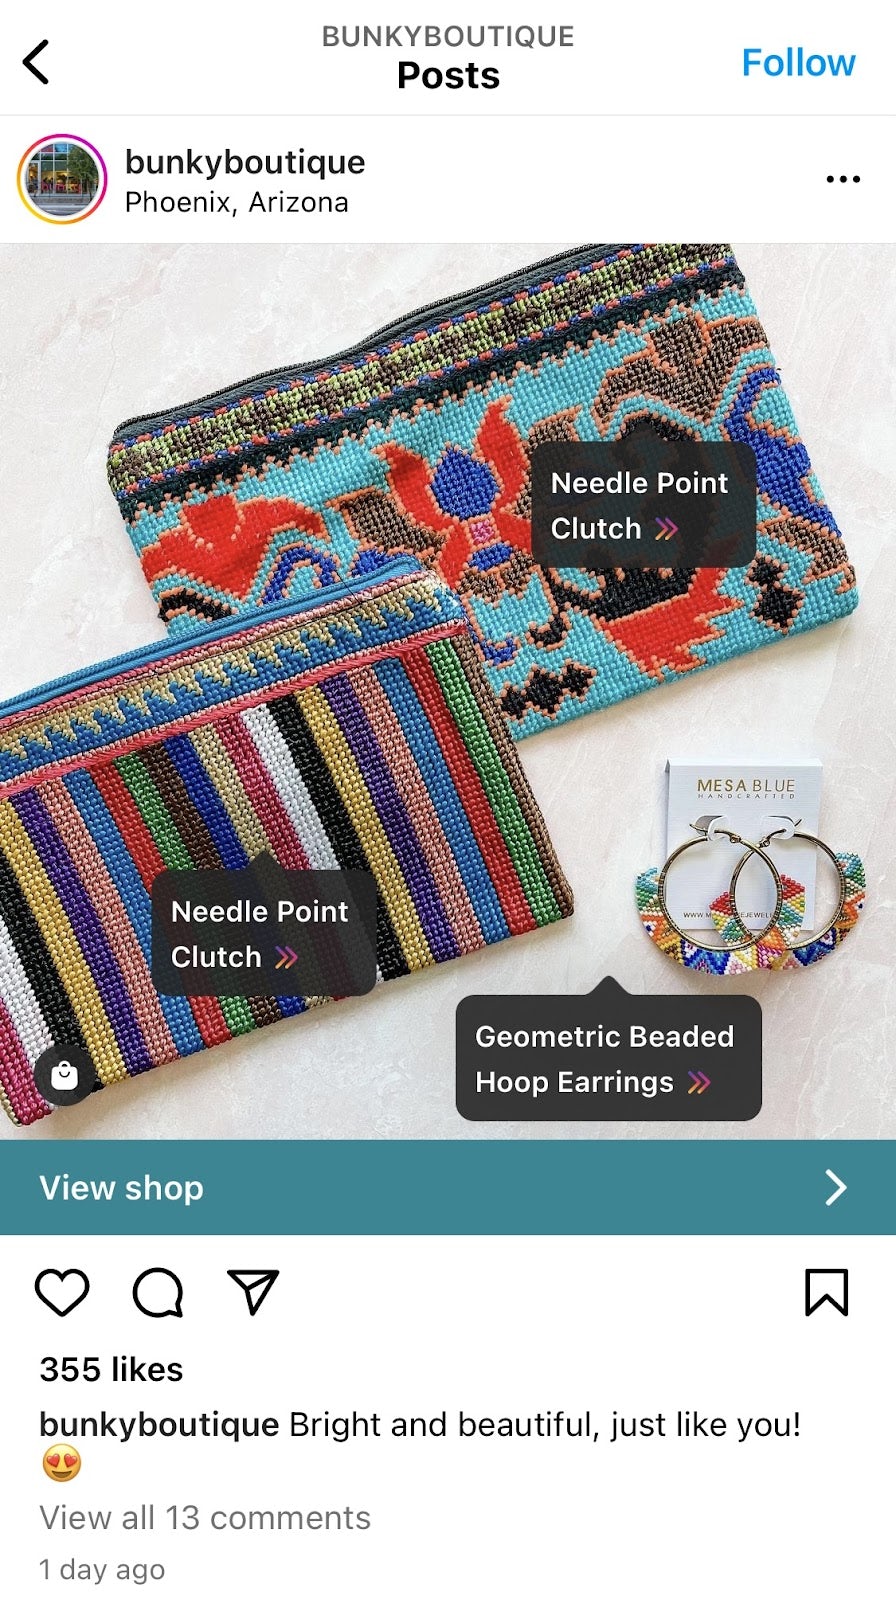 Screenshot from Bunky Boutique Instagram account showing how it looks when a brand tags items from their shop